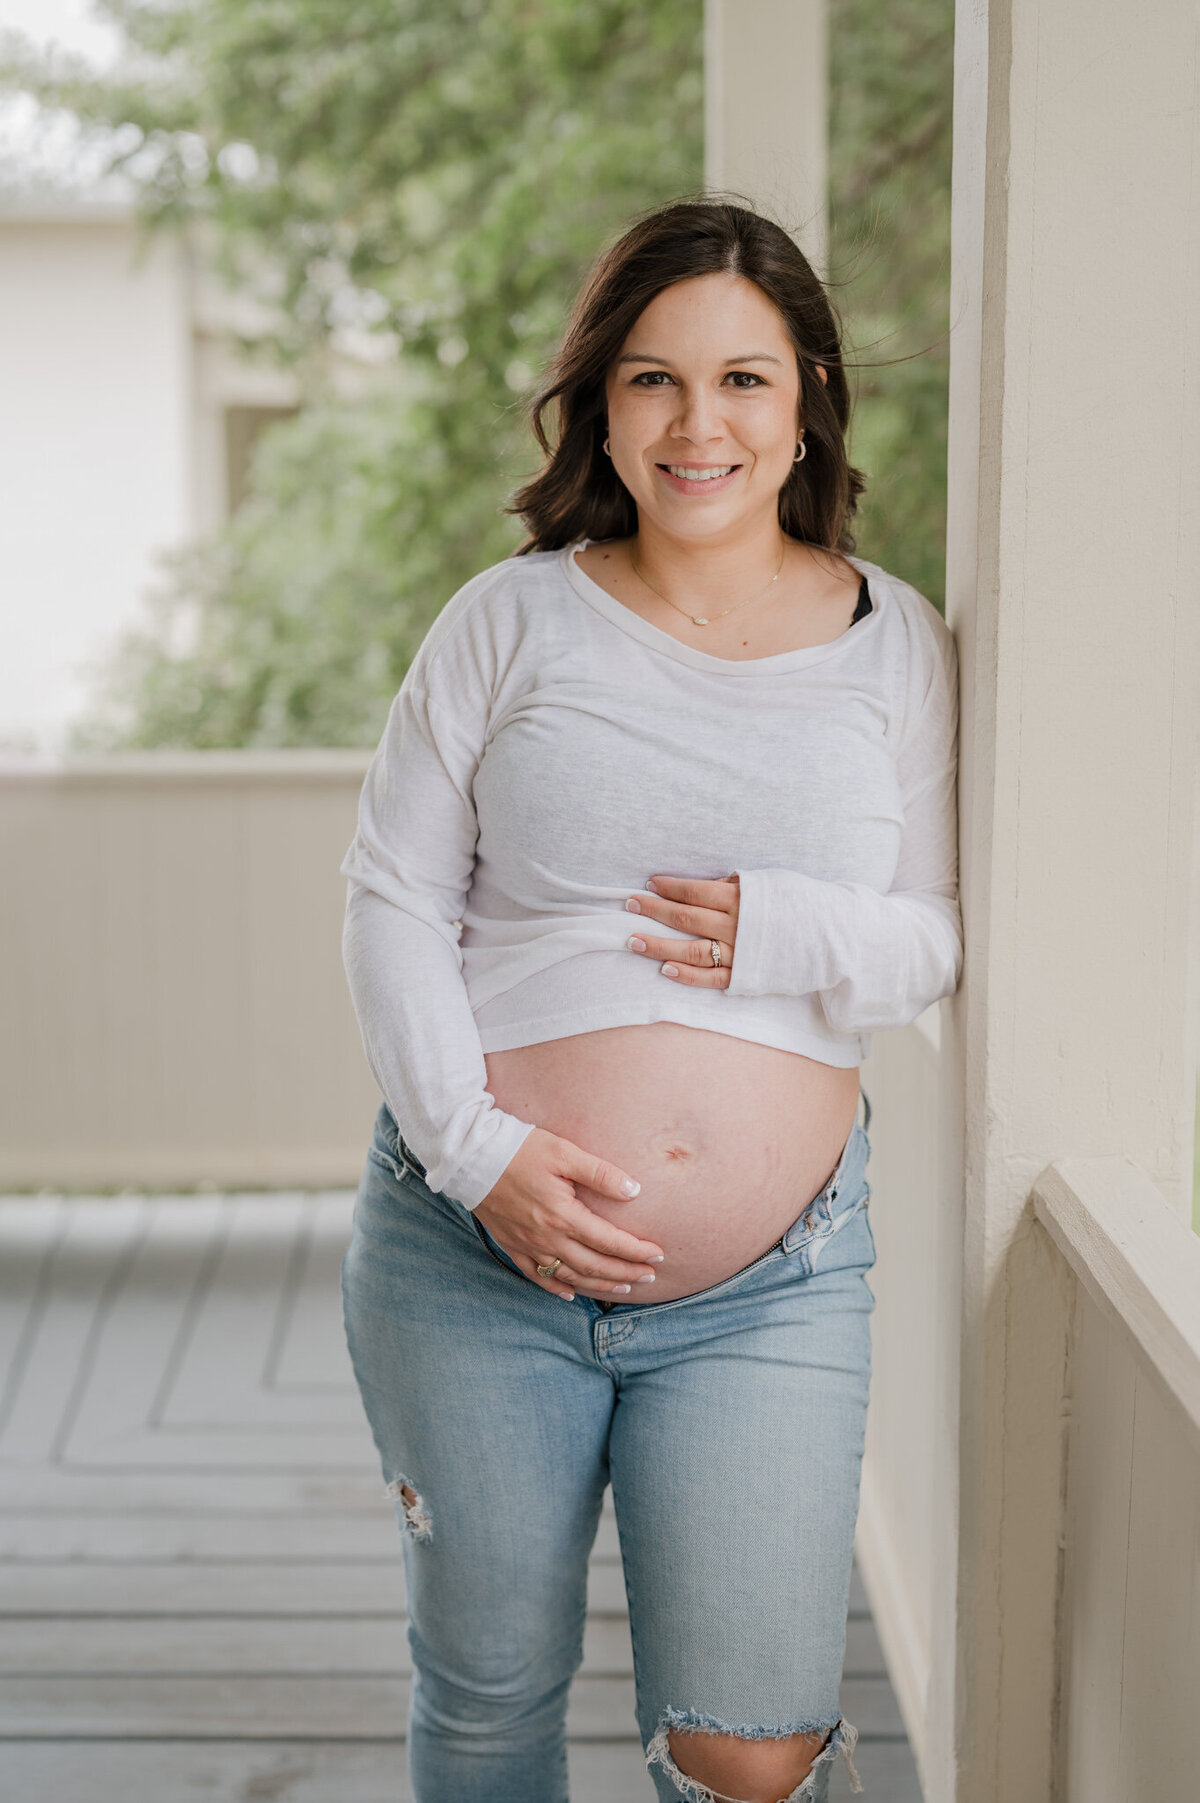 Pregnant woman in jeans and a raised white shirt holds her belly and smiles at the camera during maternity pictures.